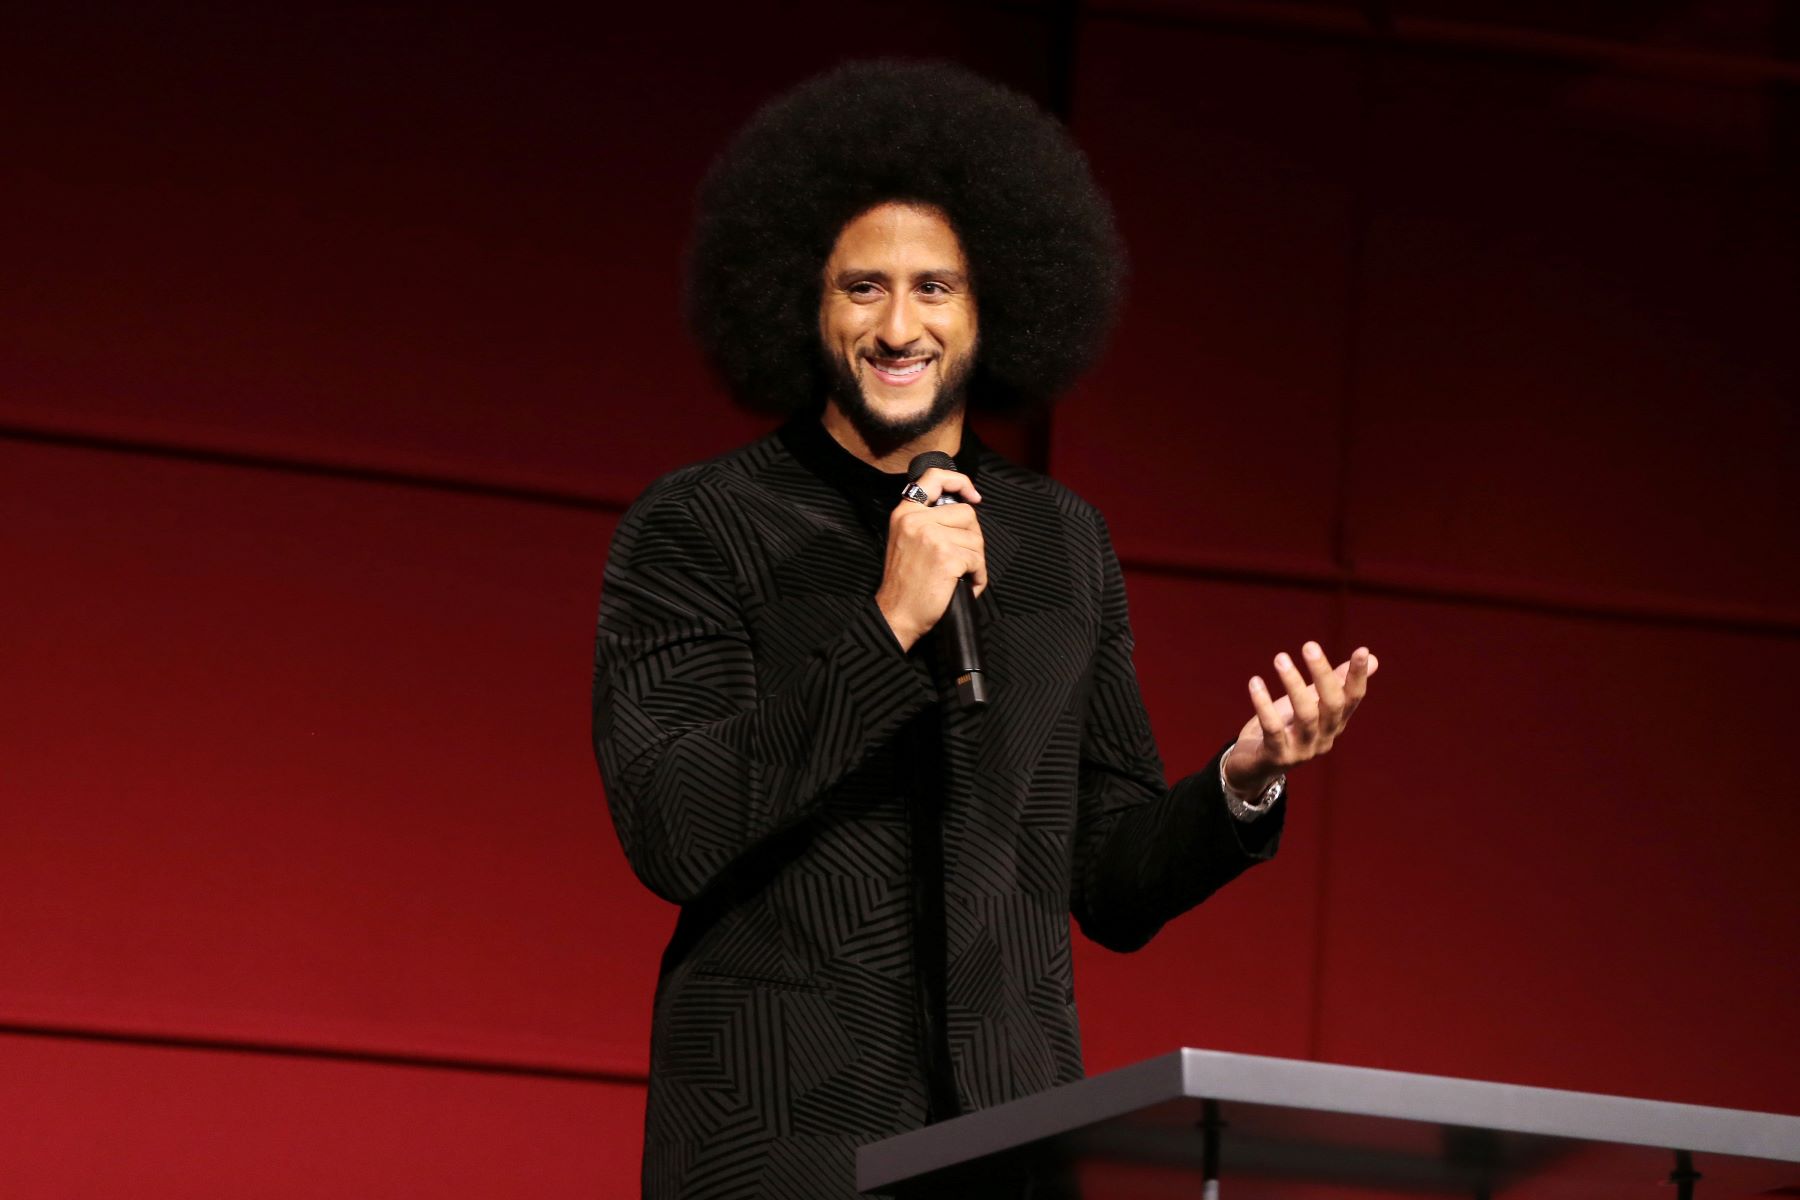 Colin Kaepernick speaking about the Netflix series 'Colin in Black and White' which goes over his life, football career, family, parents, and more